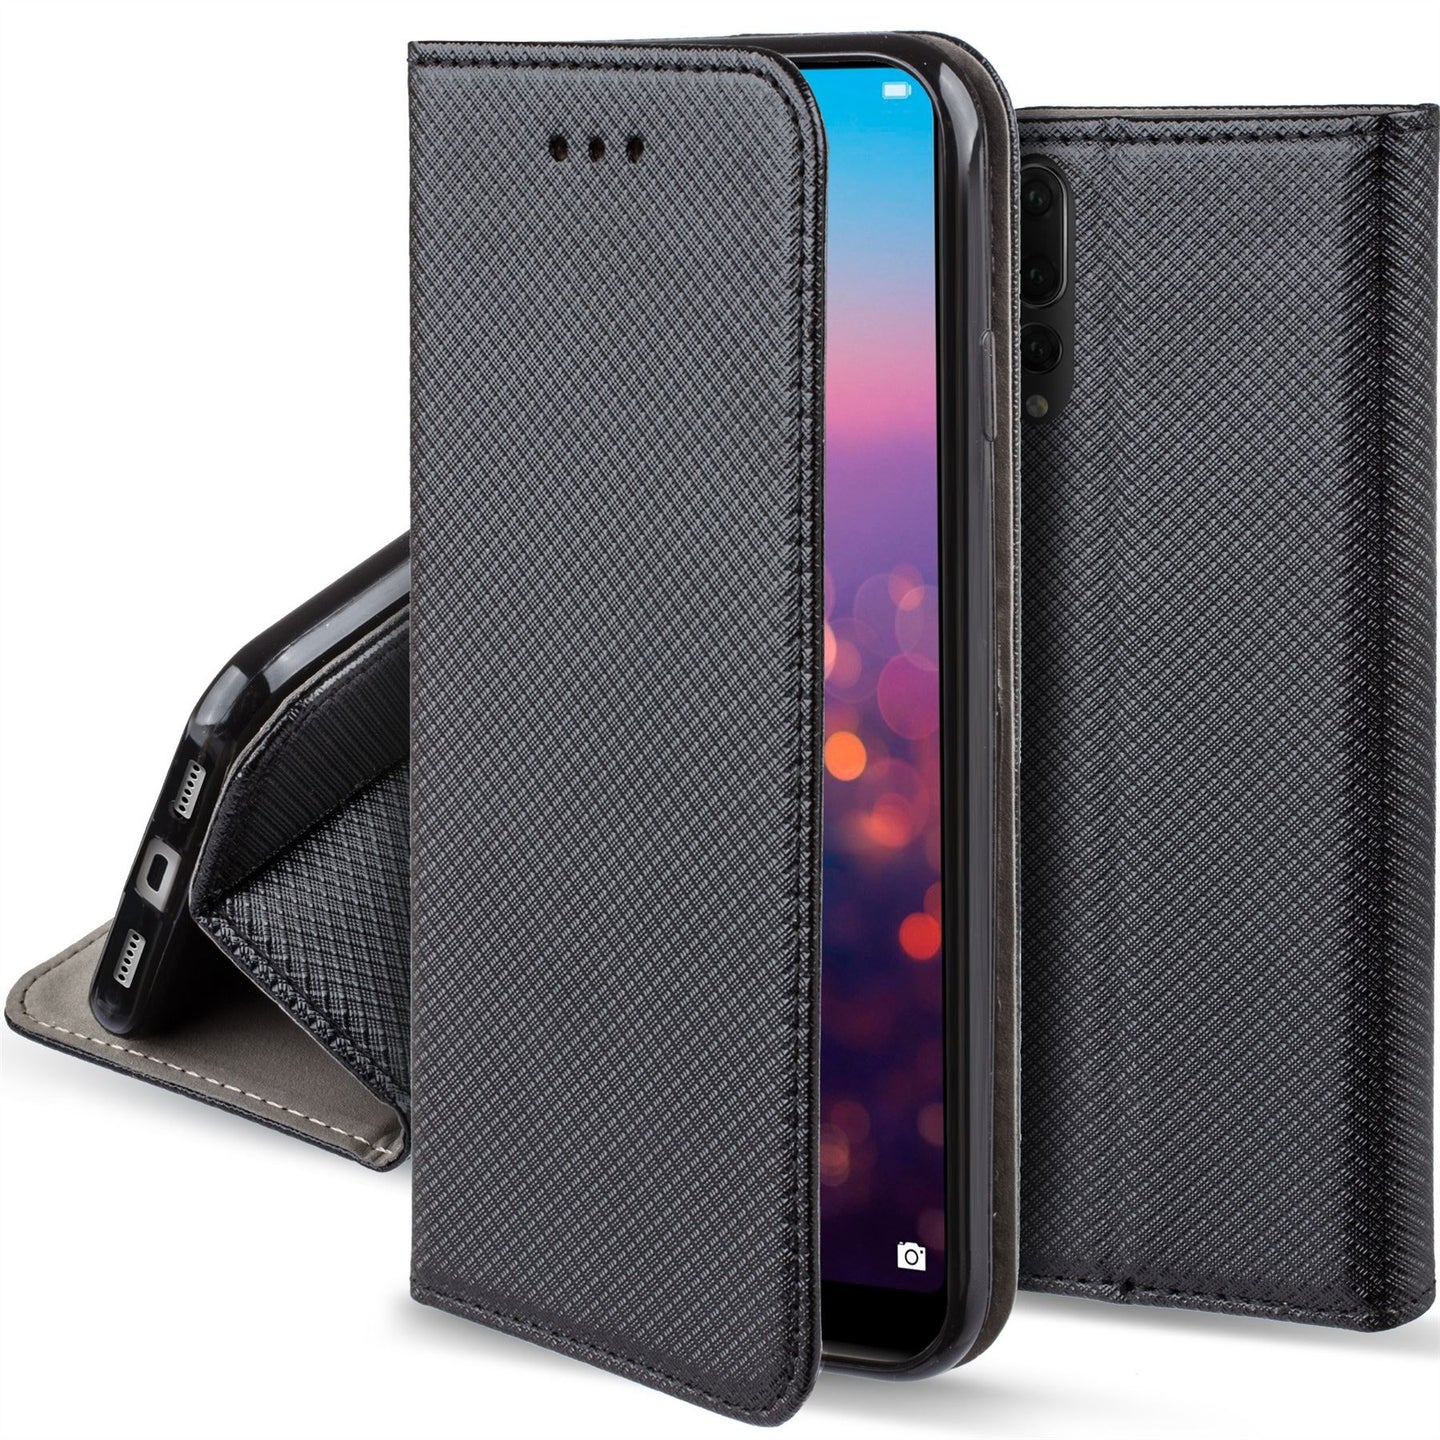 Moozy Case Flip Cover for Huawei P20 Pro, Black - Smart Magnetic Flip Case with Card Holder and Stand